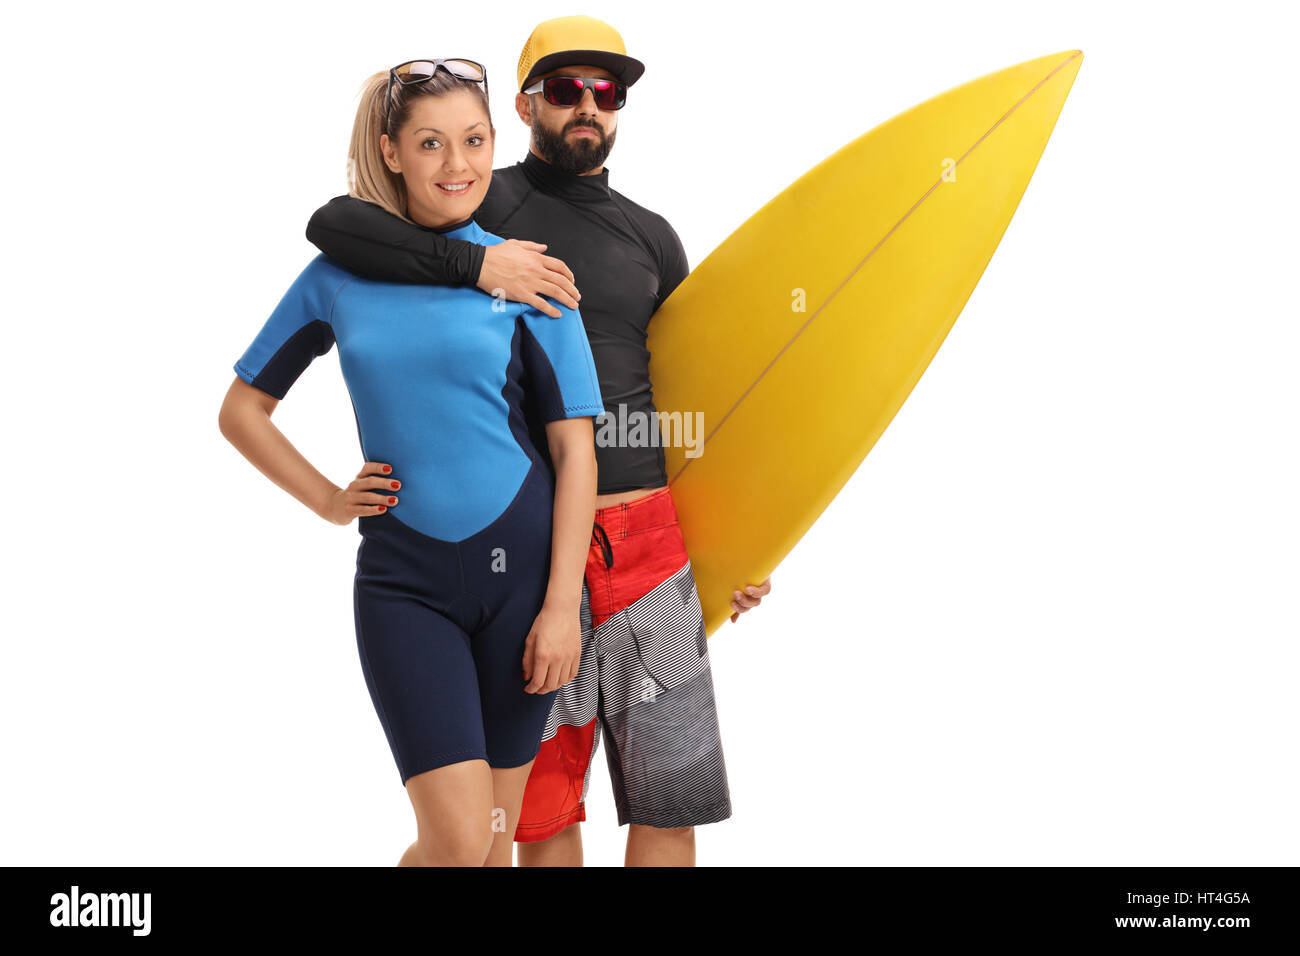 Female surfer with a male surfer holding a surfboard isolated on white background Stock Photo